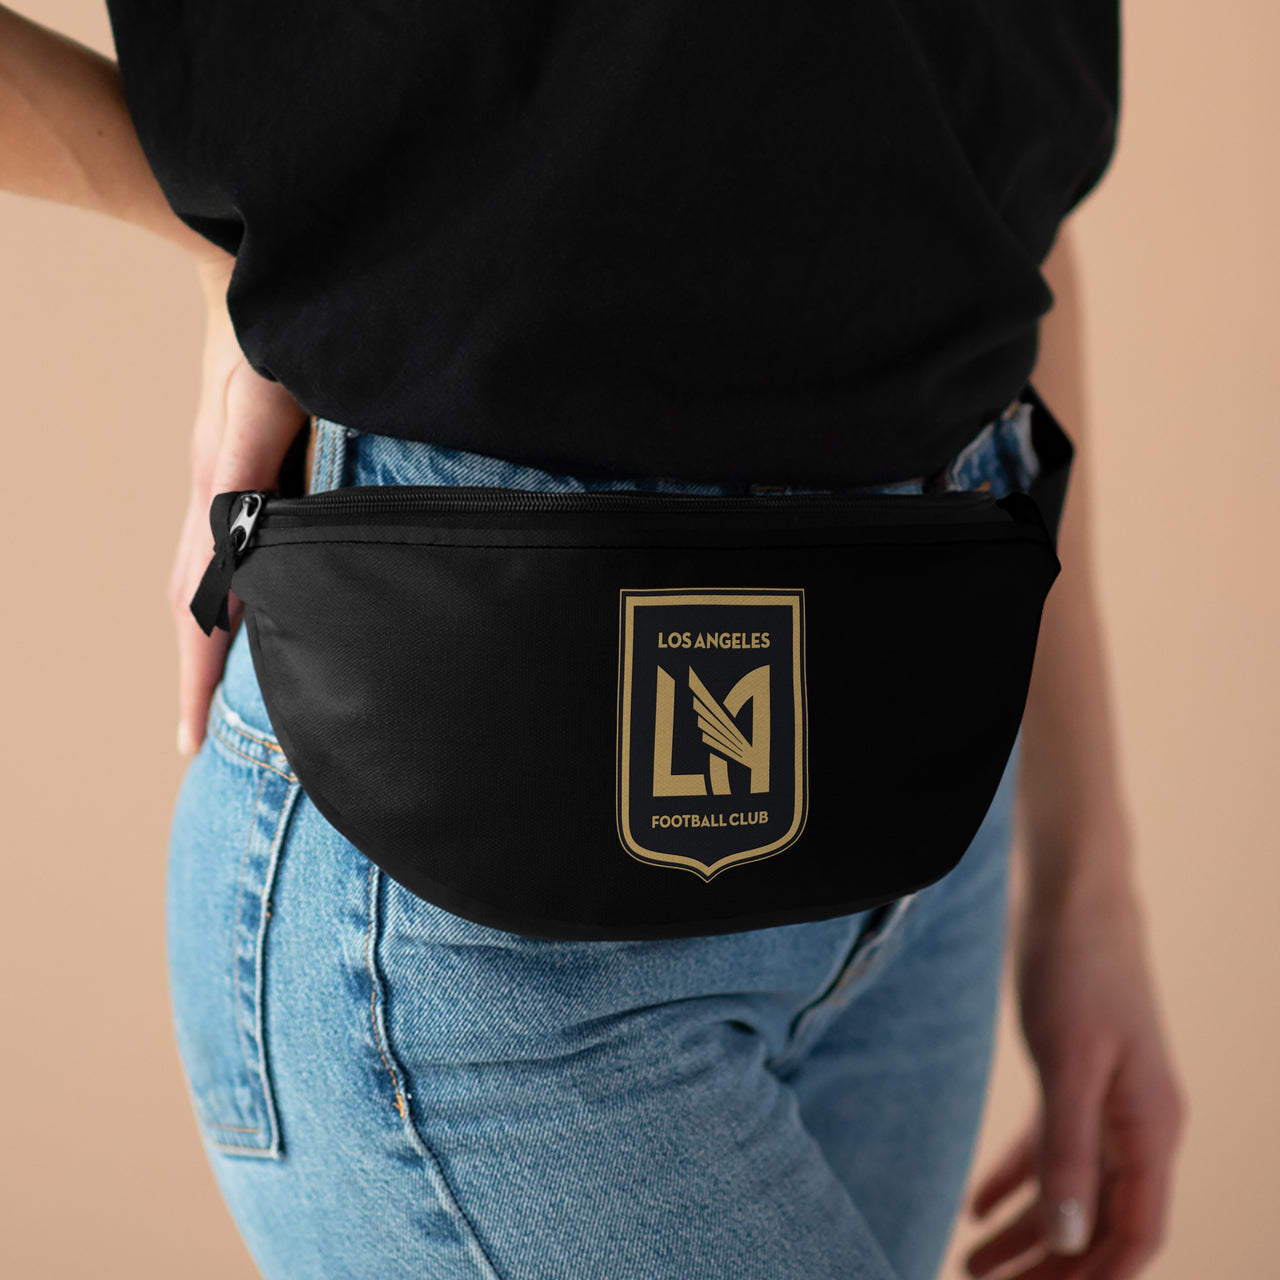 LAFC Fanny Pack